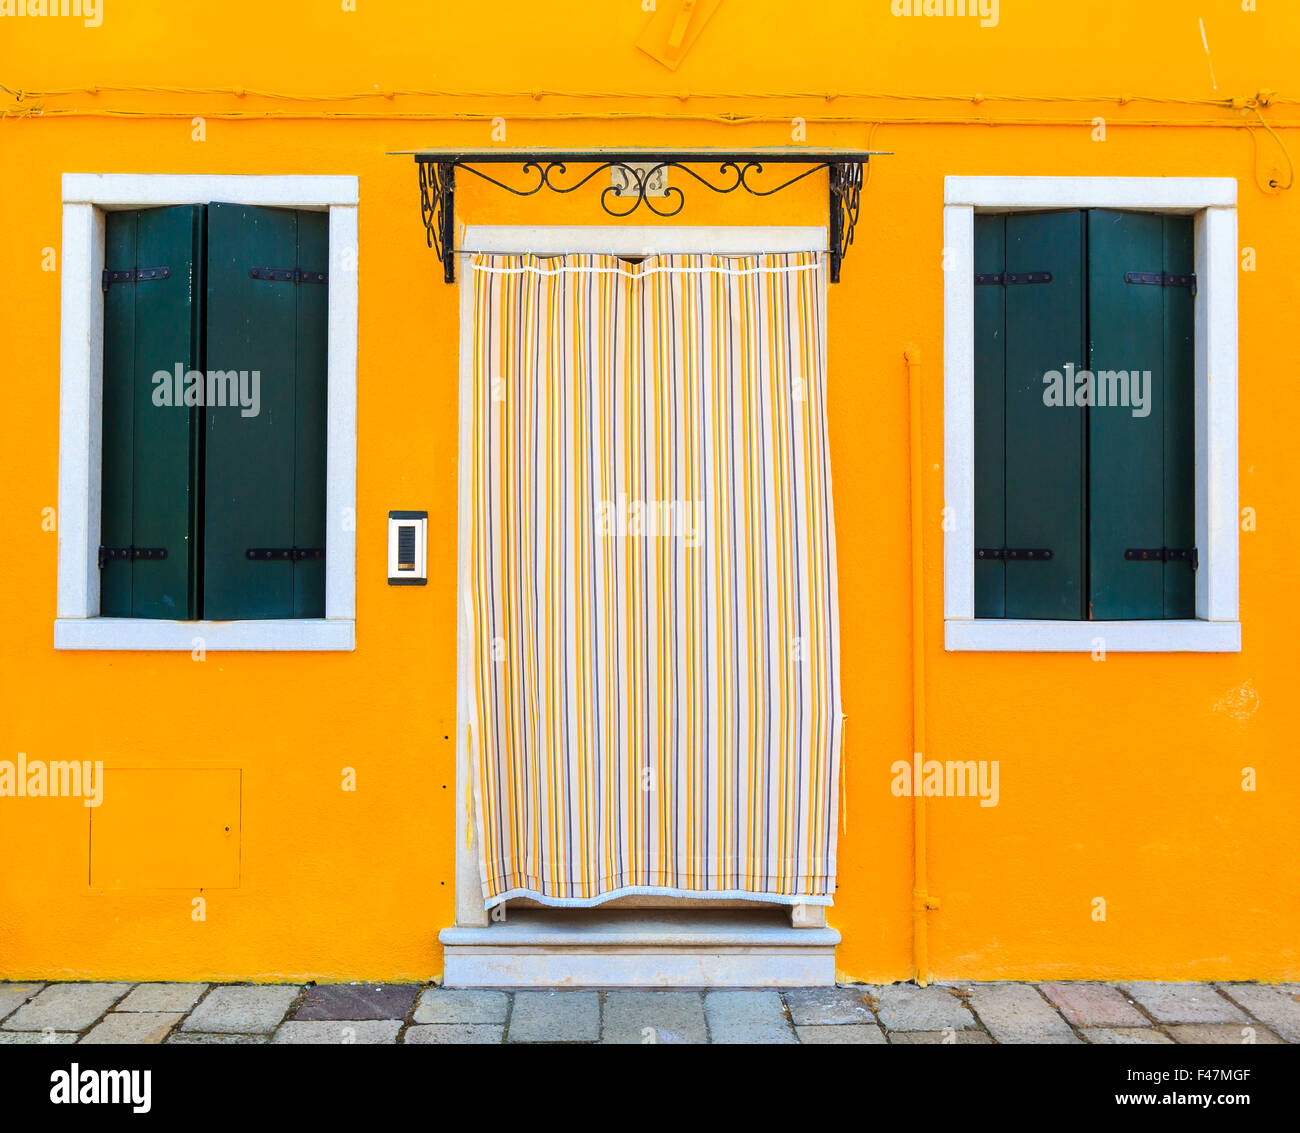 Door, Window, yellow Shutter, Old, Fame, House, Blue, Green, Brown, Steps, Shutters, Windows, Colour, Color, Colours, Colors, Stock Photo